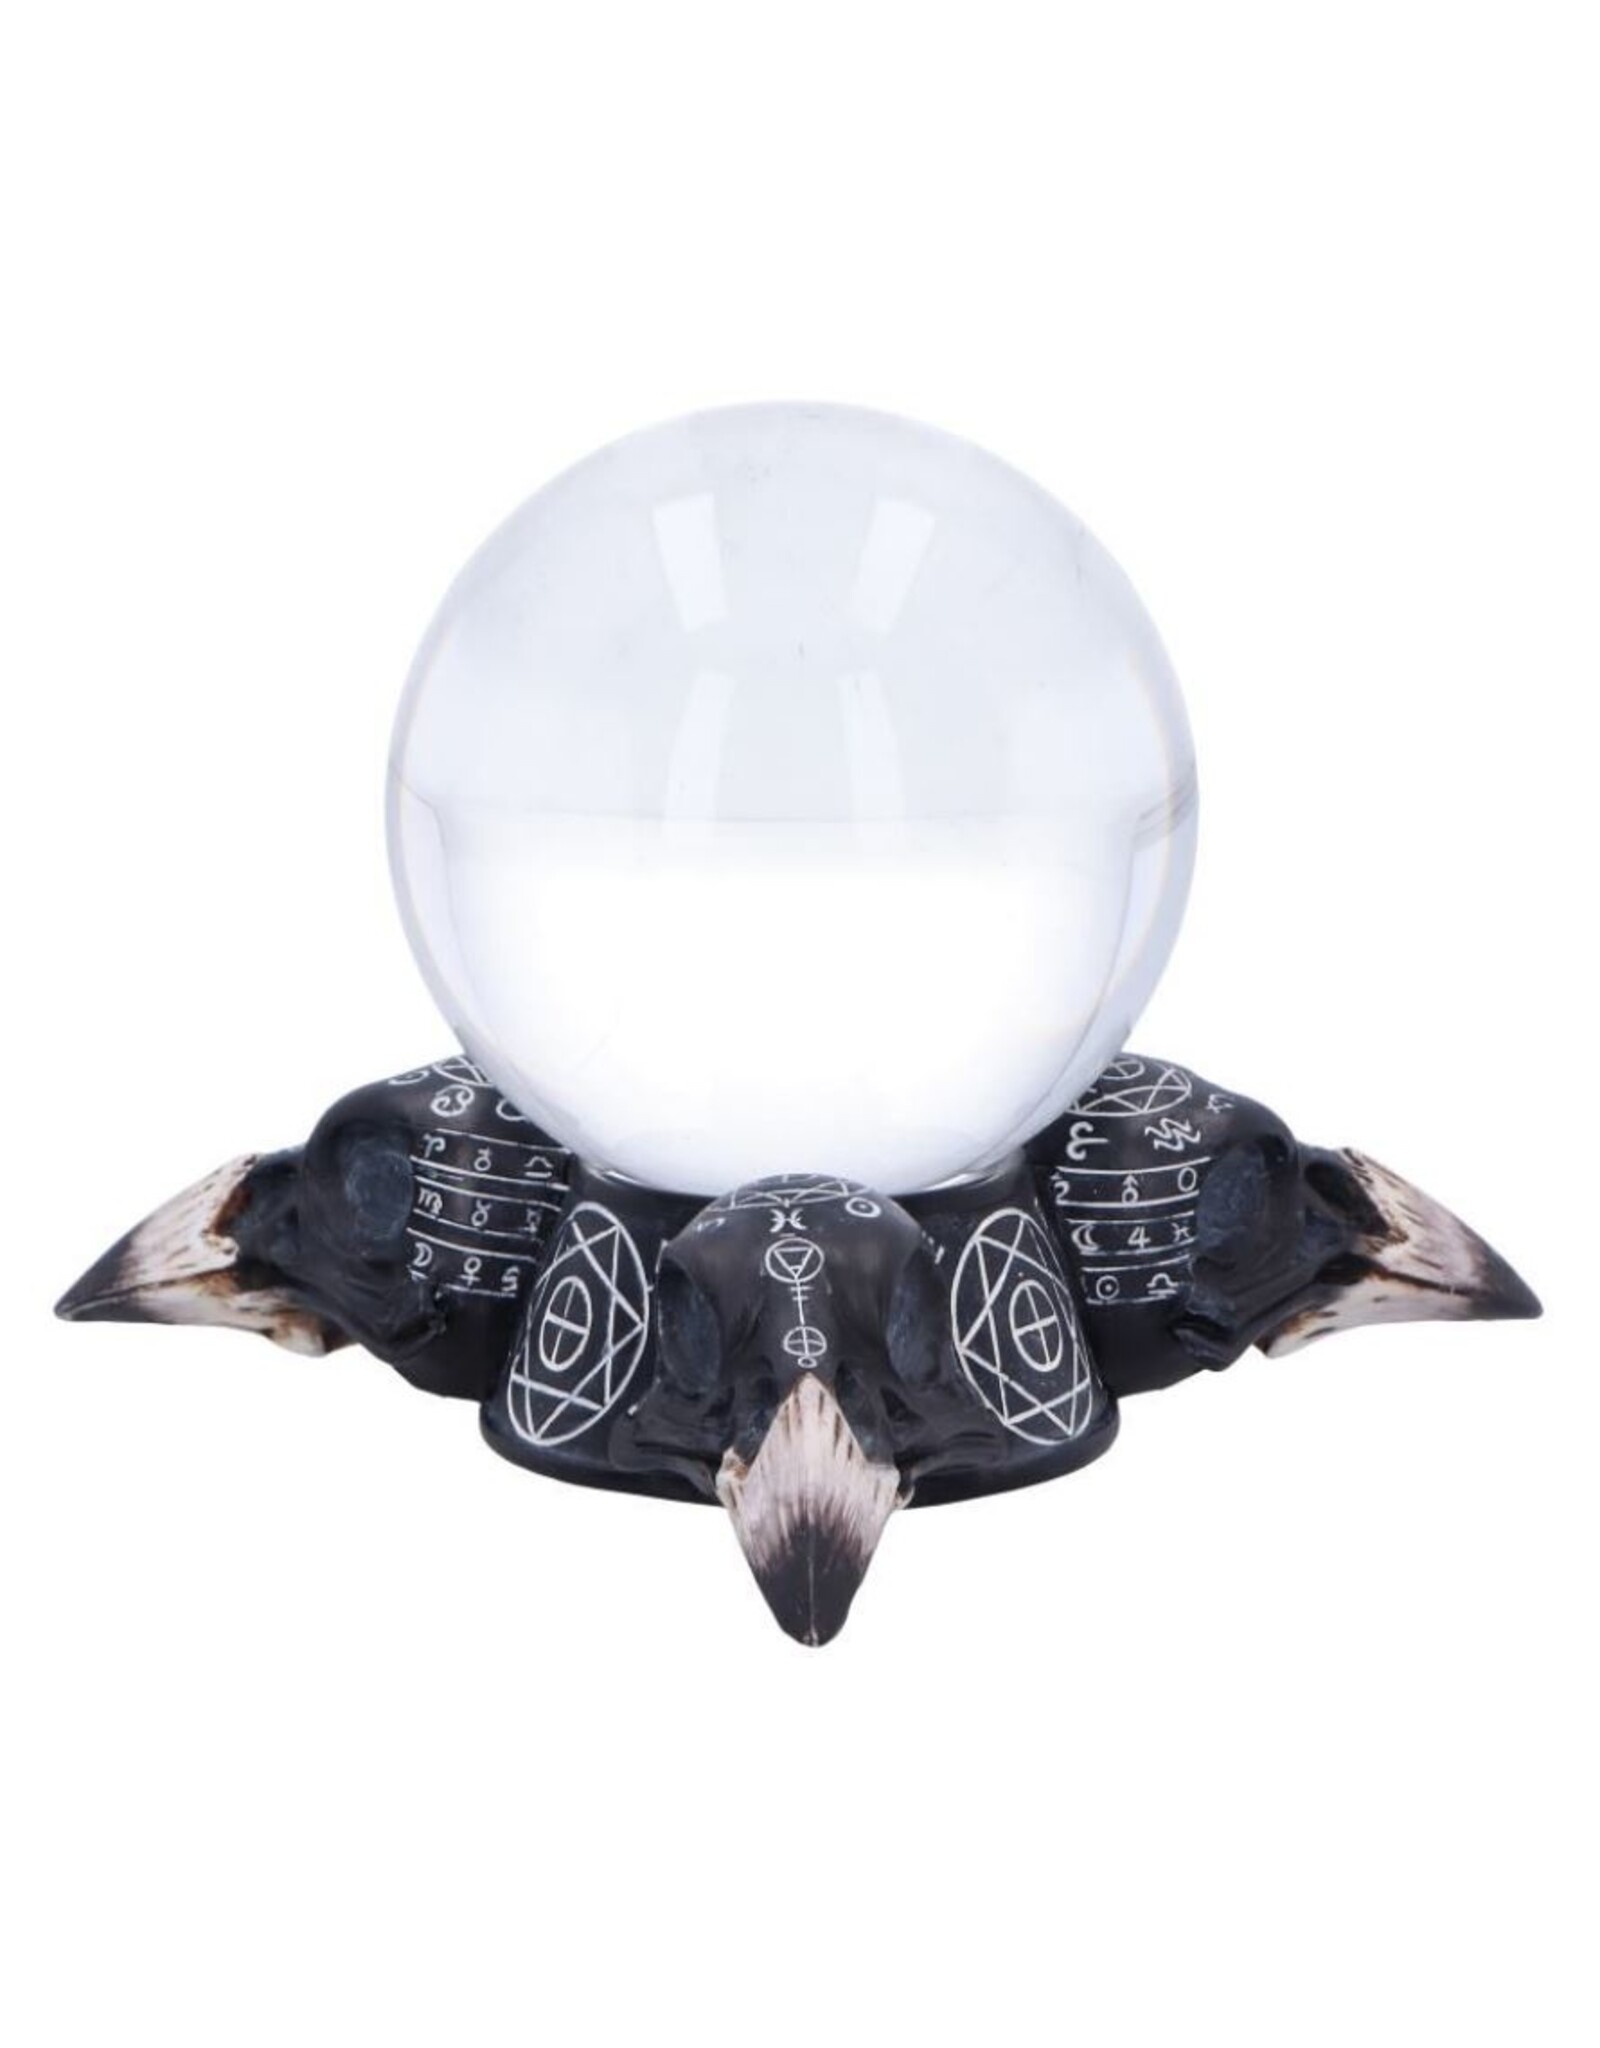 NemesisNow Miscellaneous - Gothic Crystal Ball and Holder Future of the Raven